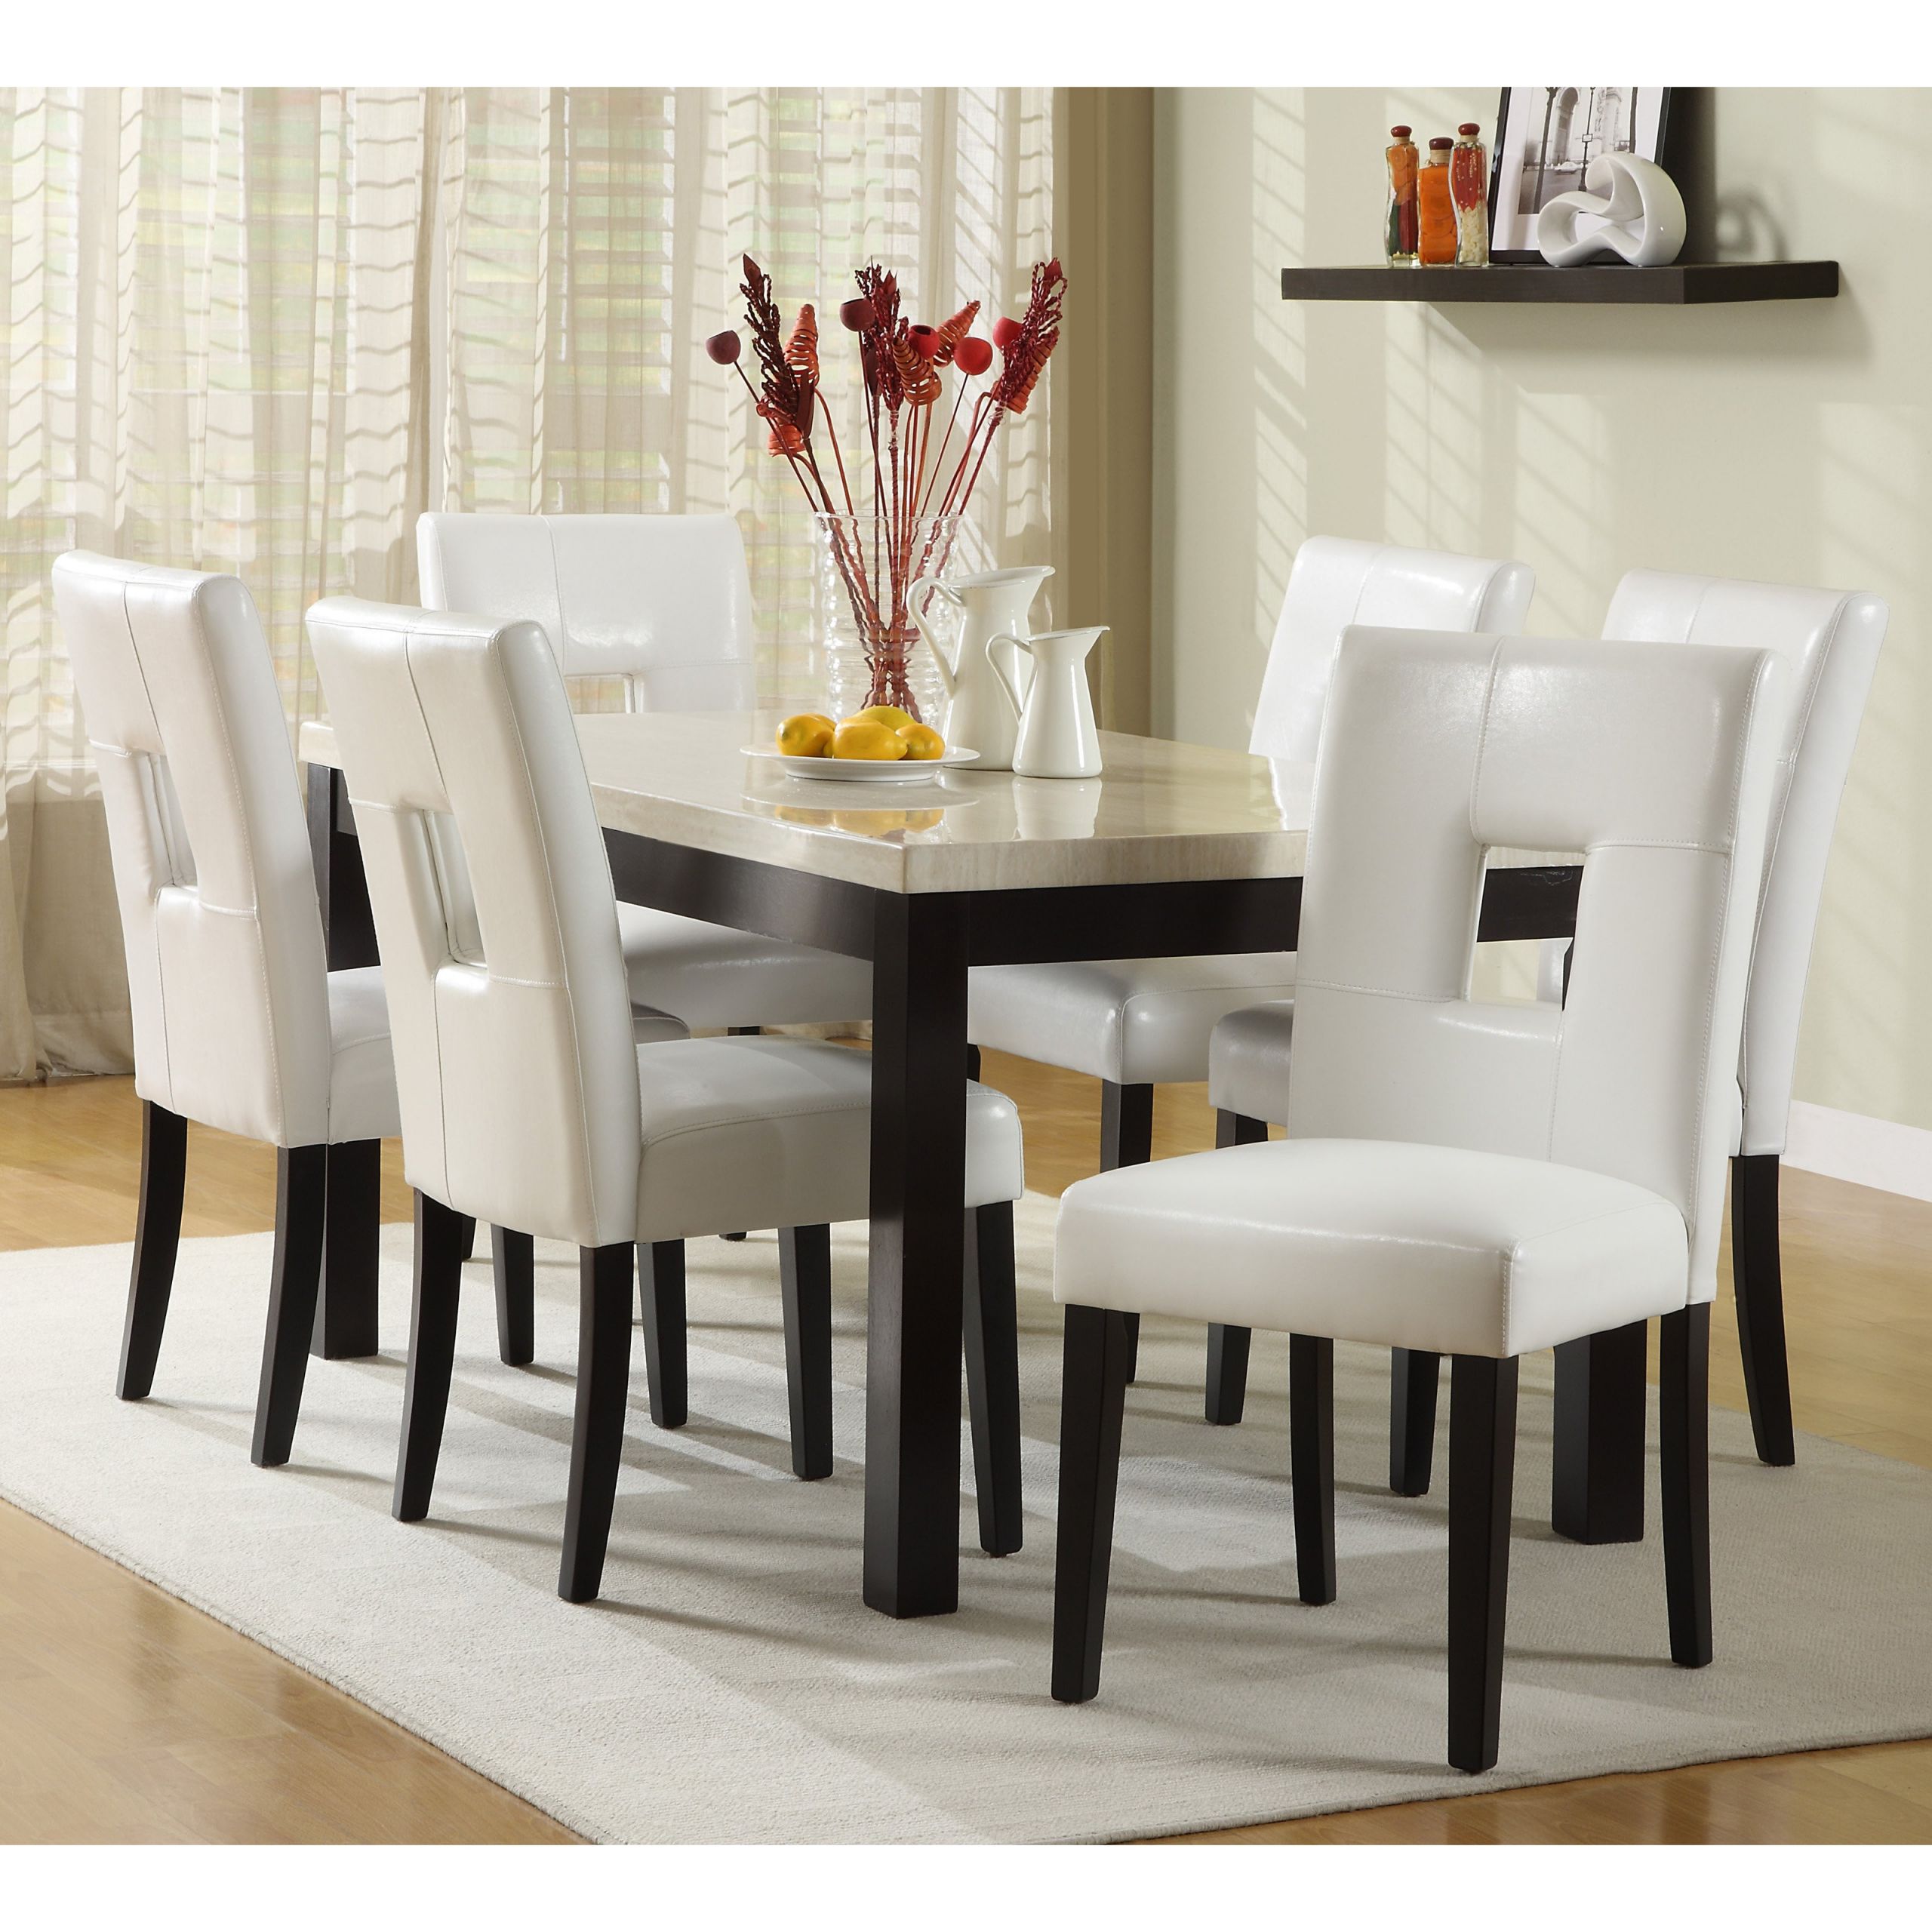 Round White Kitchen Table Set
 Beautiful White Round Kitchen Table and Chairs